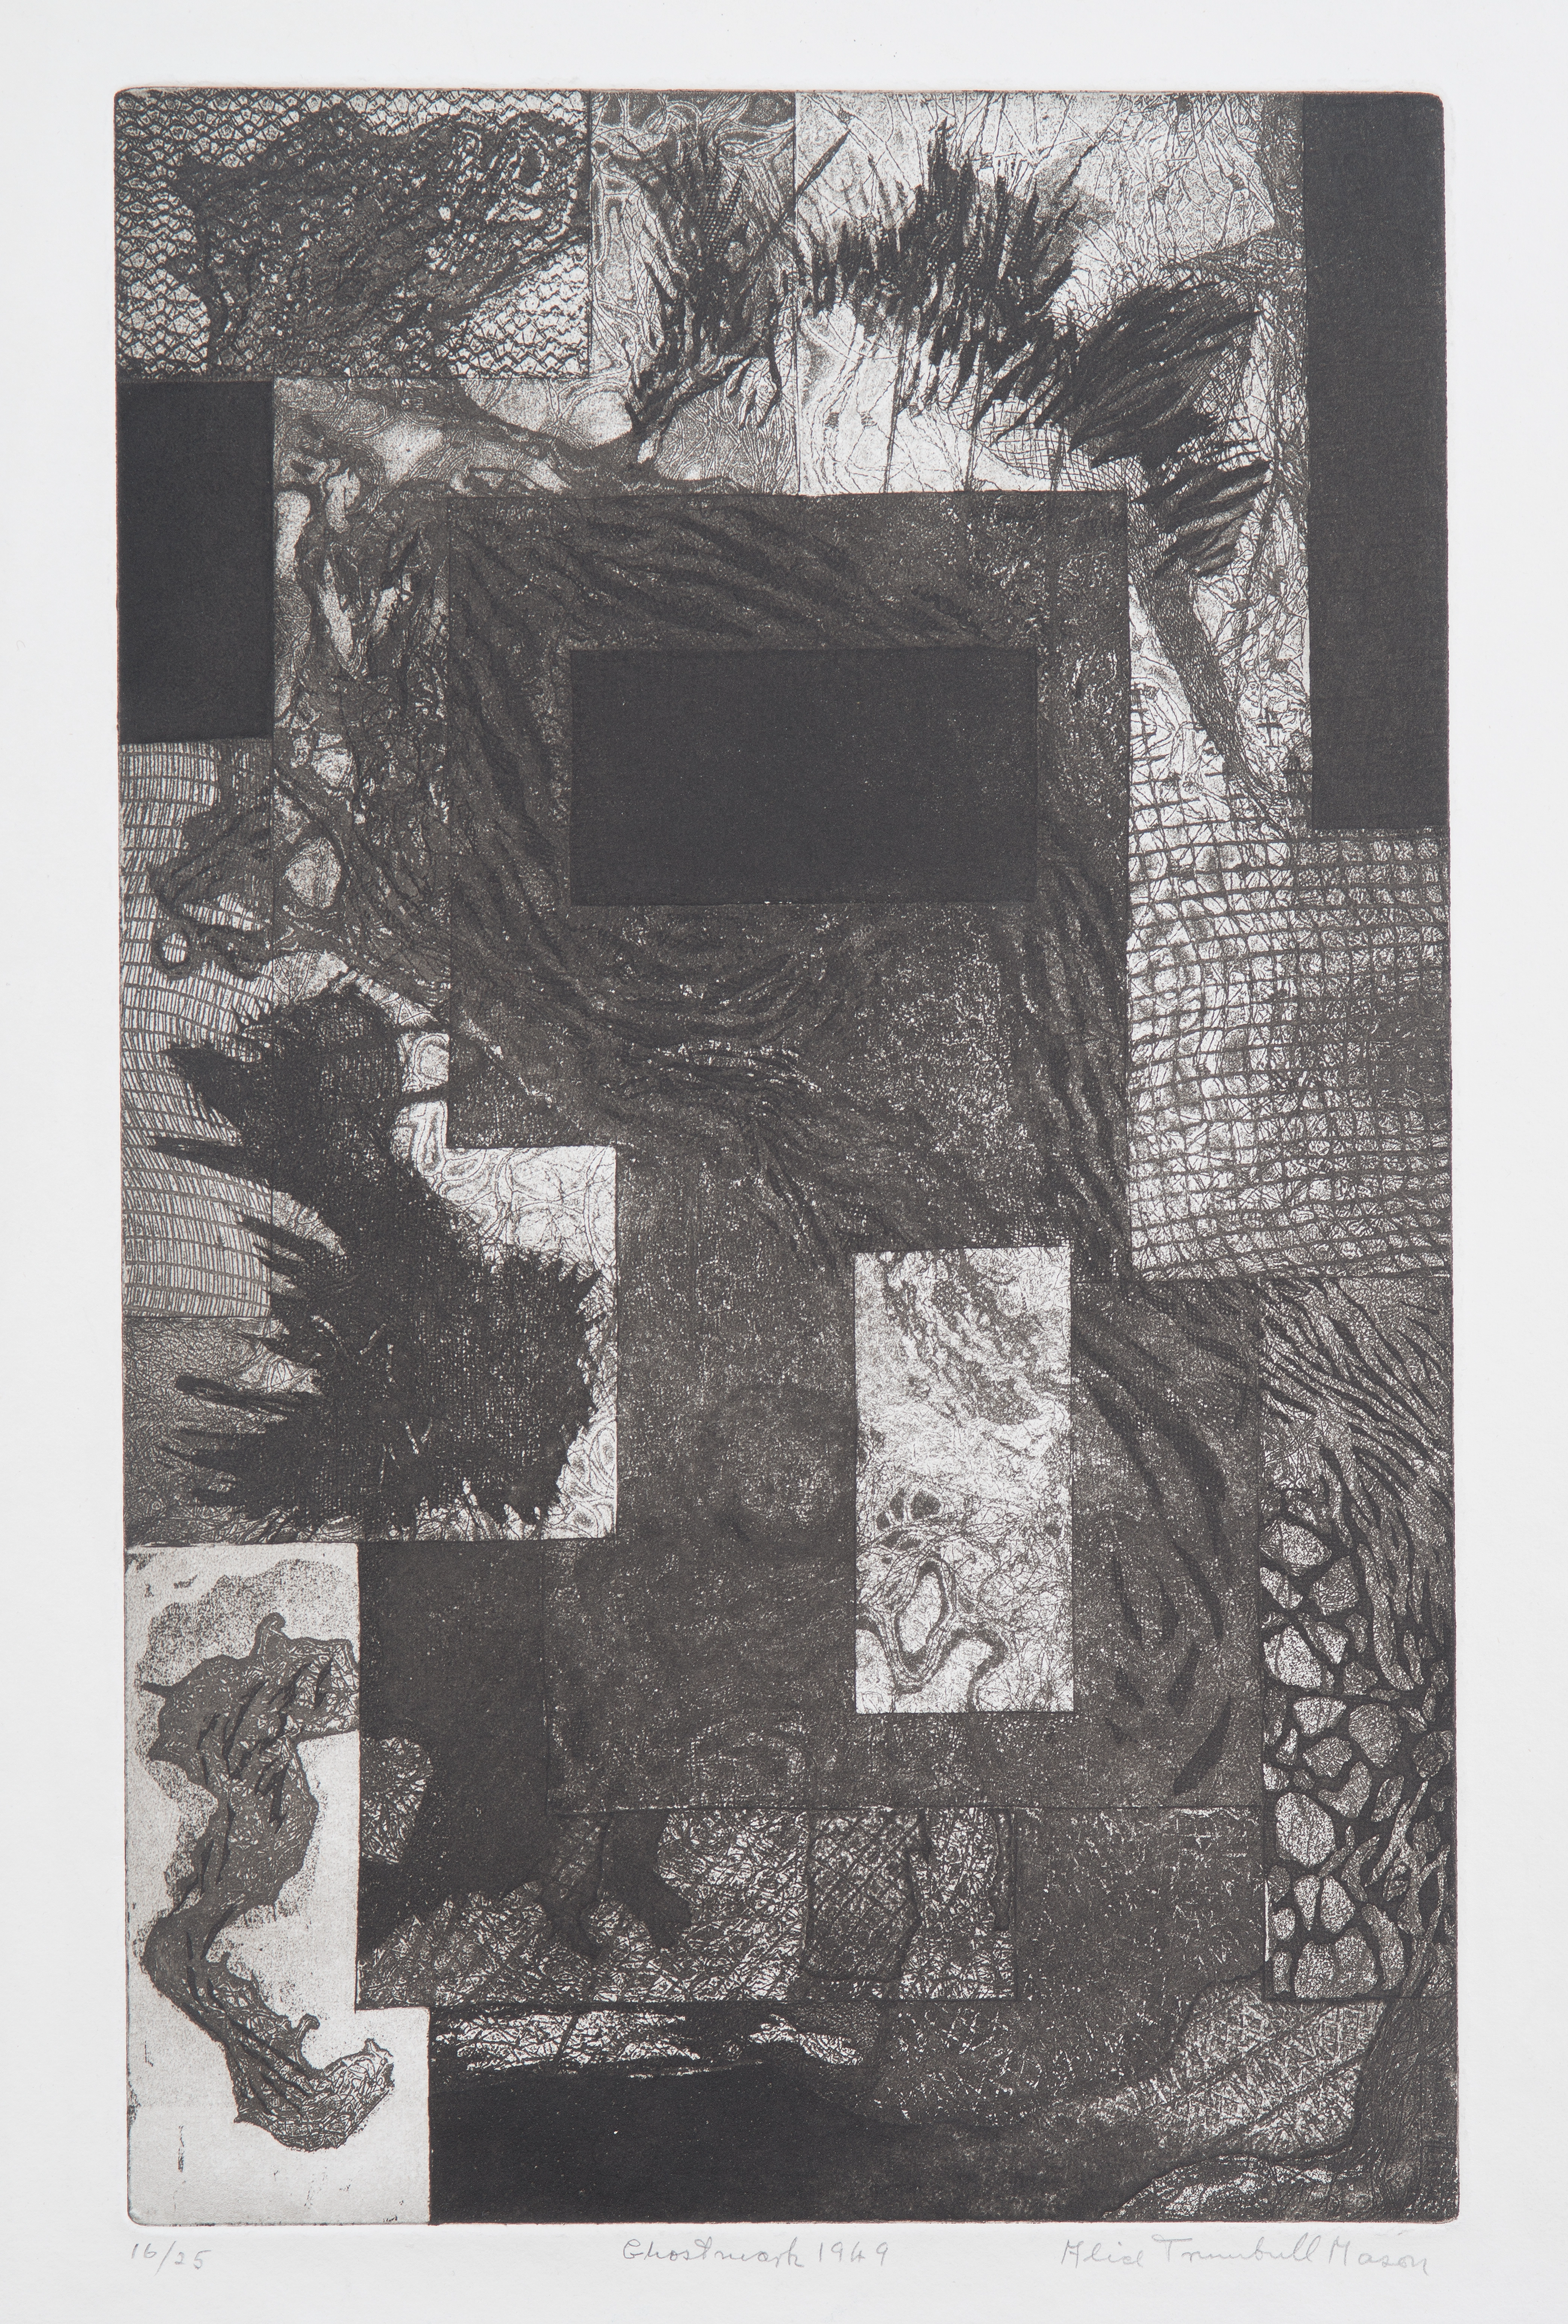 Abstract print on paper, comprised of grey-toned geometric forms and abstract line work. Some forms contain organic and net-like textural lines.